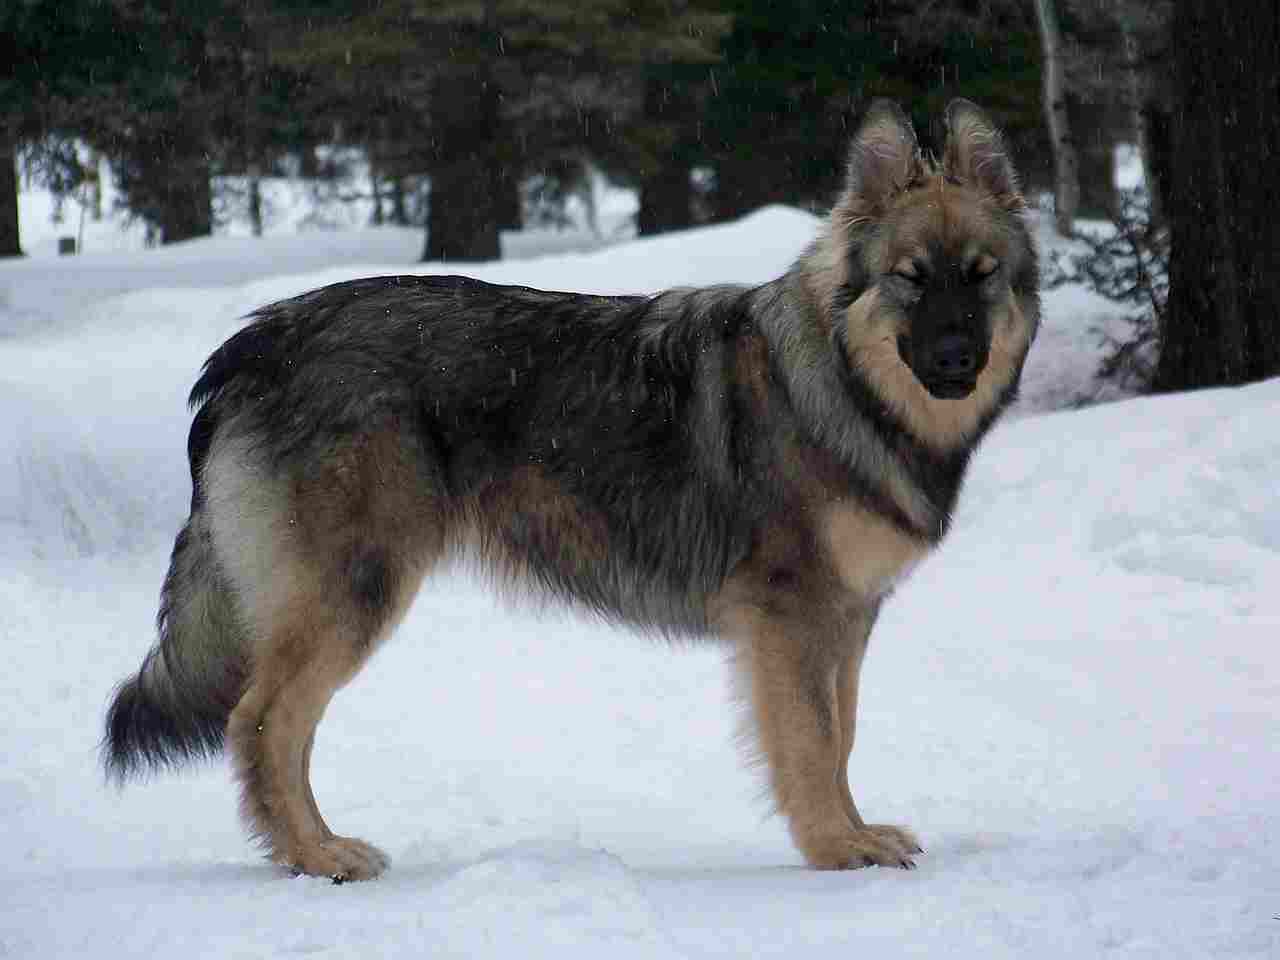 German Shepherd Vs Wolf: Both German Shepherds and Wolves are Susceptible to the Impacts of Human Activities (Credit: Shepaluteprez 2009 .CC BY-SA 3.0.)